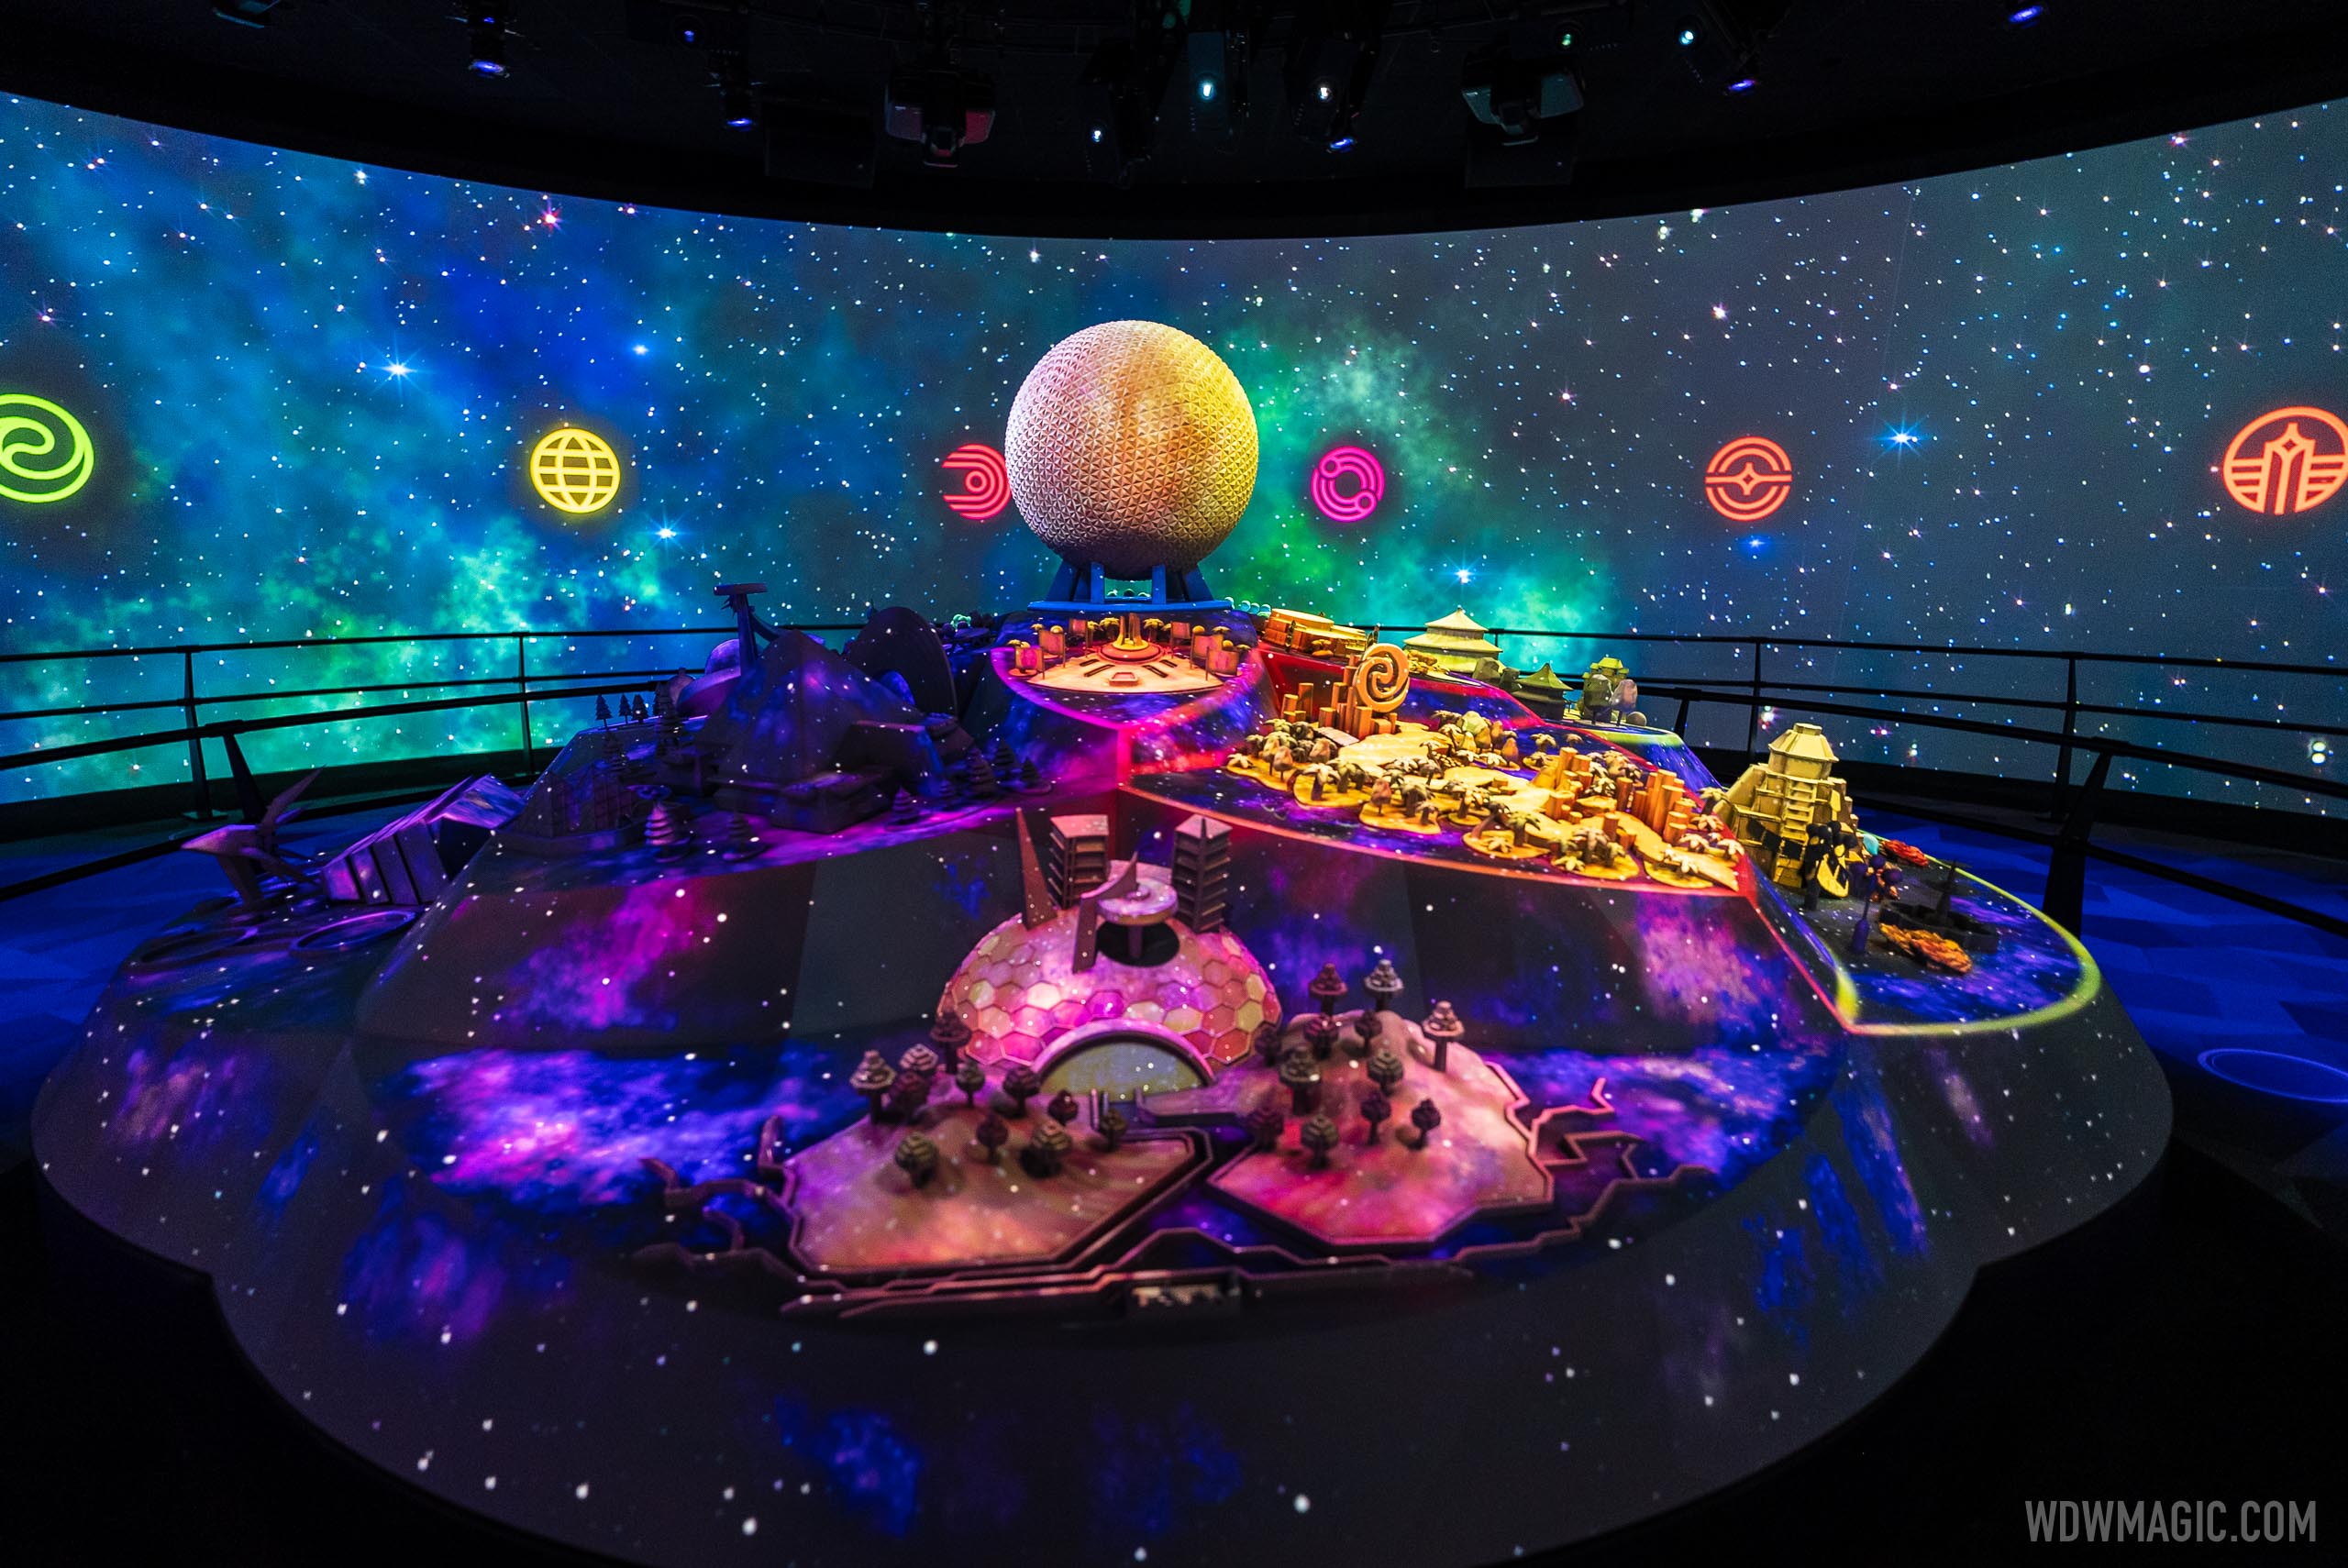 D23 Fantastic Worlds Celebration goes virtual and includes a panel on the future of EPCOT